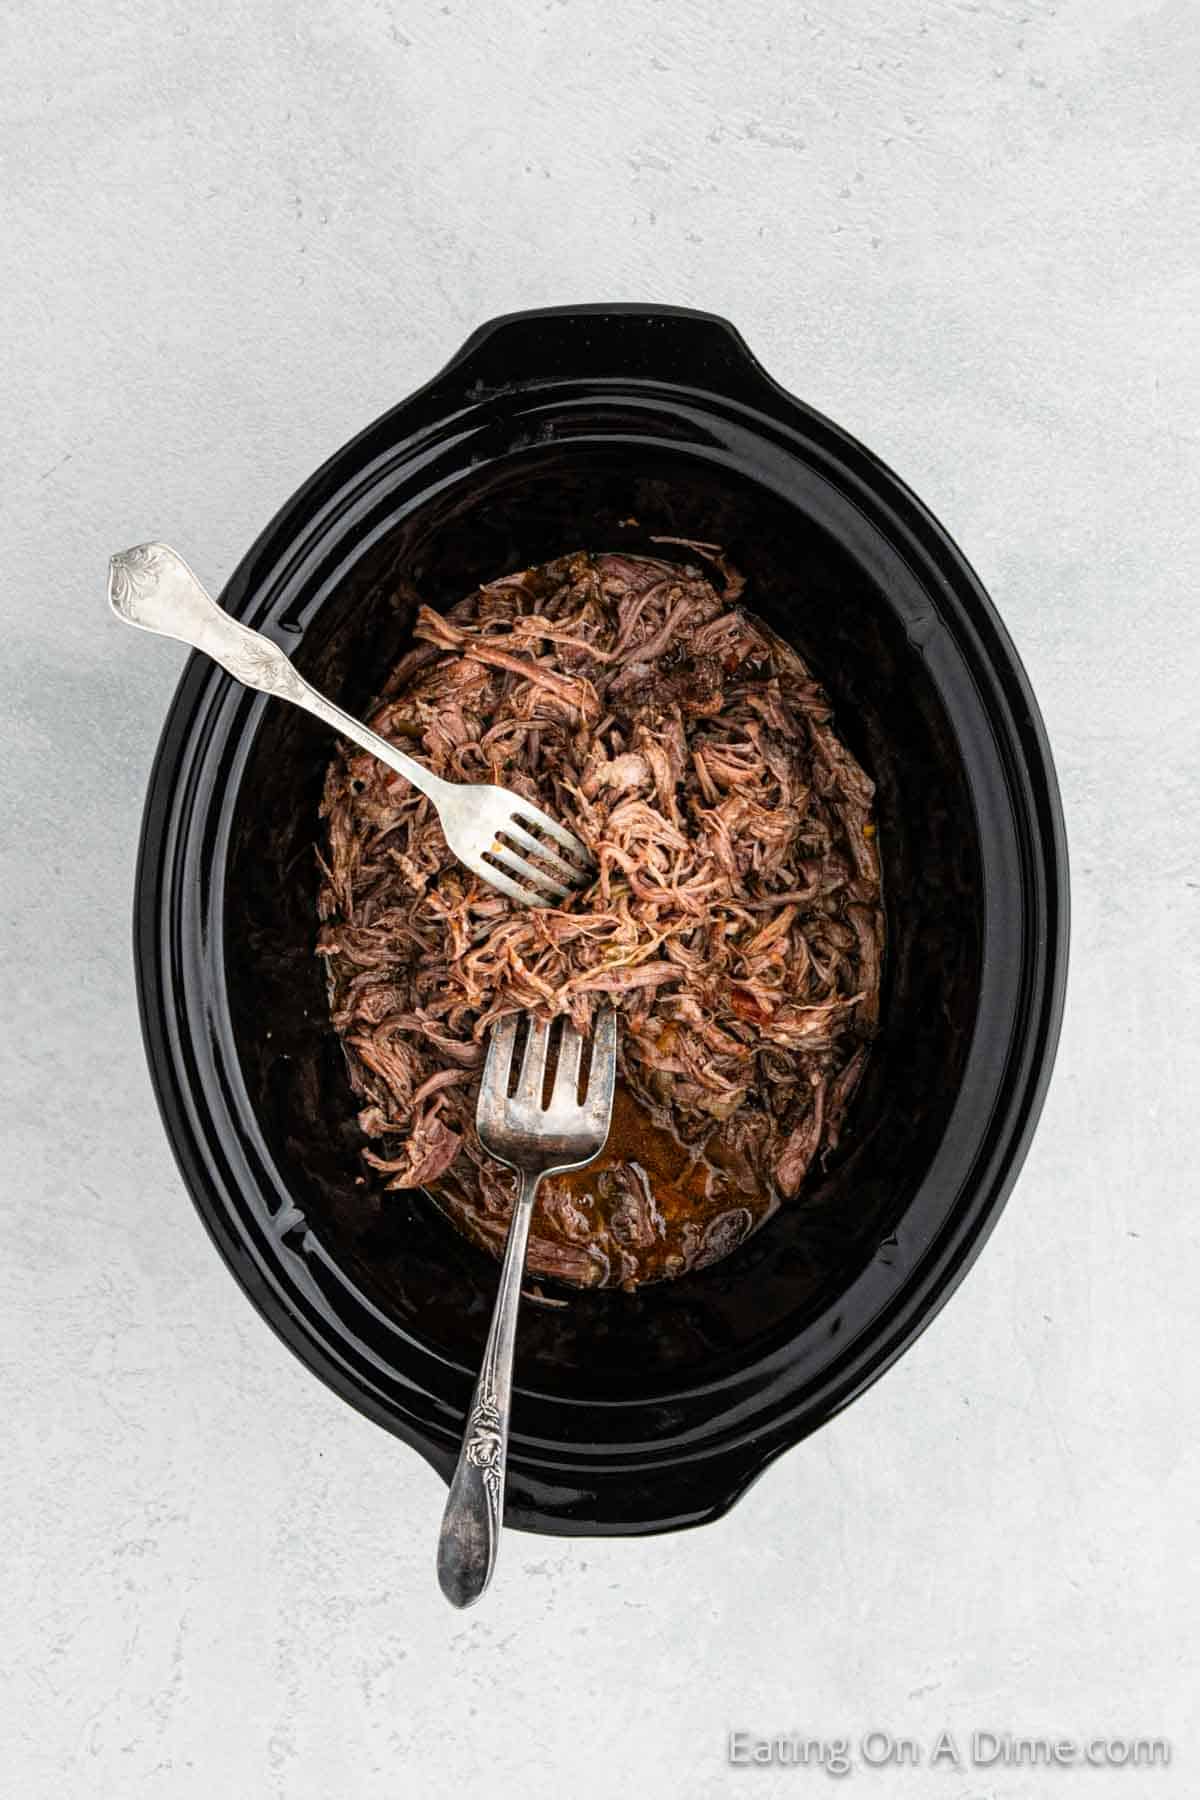 Shredded beef in the slow cooker with two forks